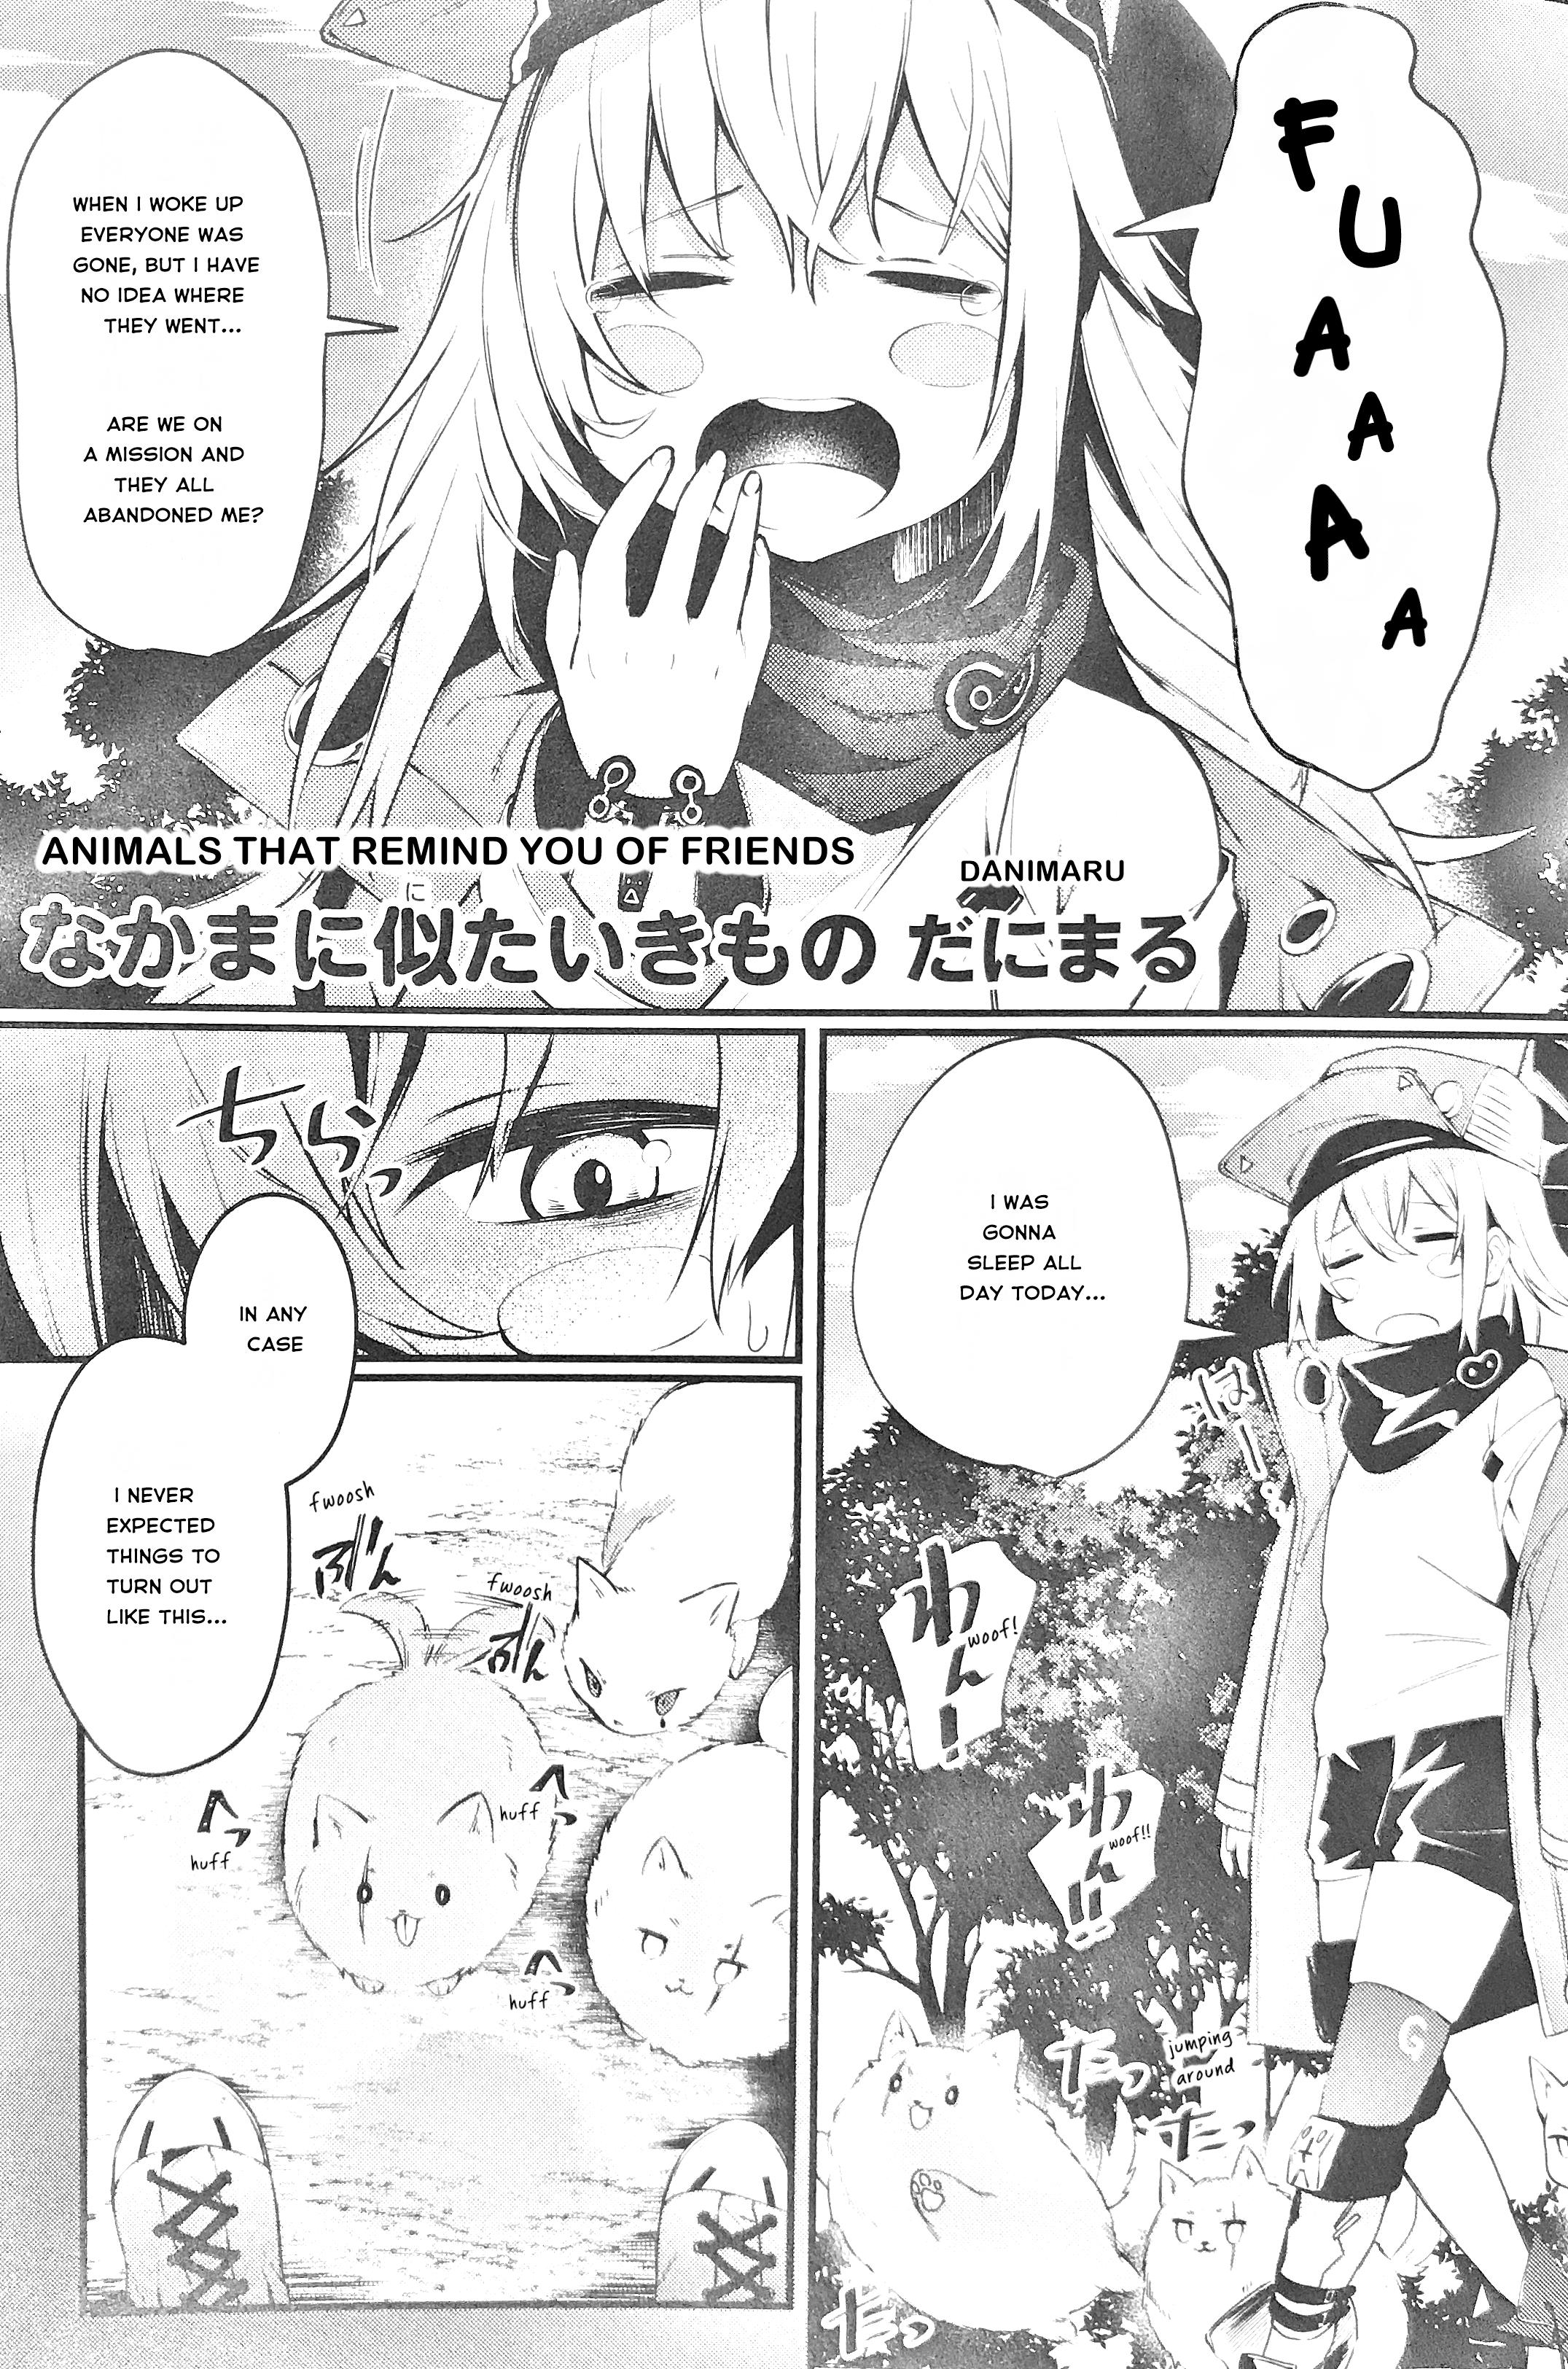 Dolls Frontline Comic Anthology - DNA Media 2019 - Chapter 26110 - Animals that Remind You of Friends - Image 1